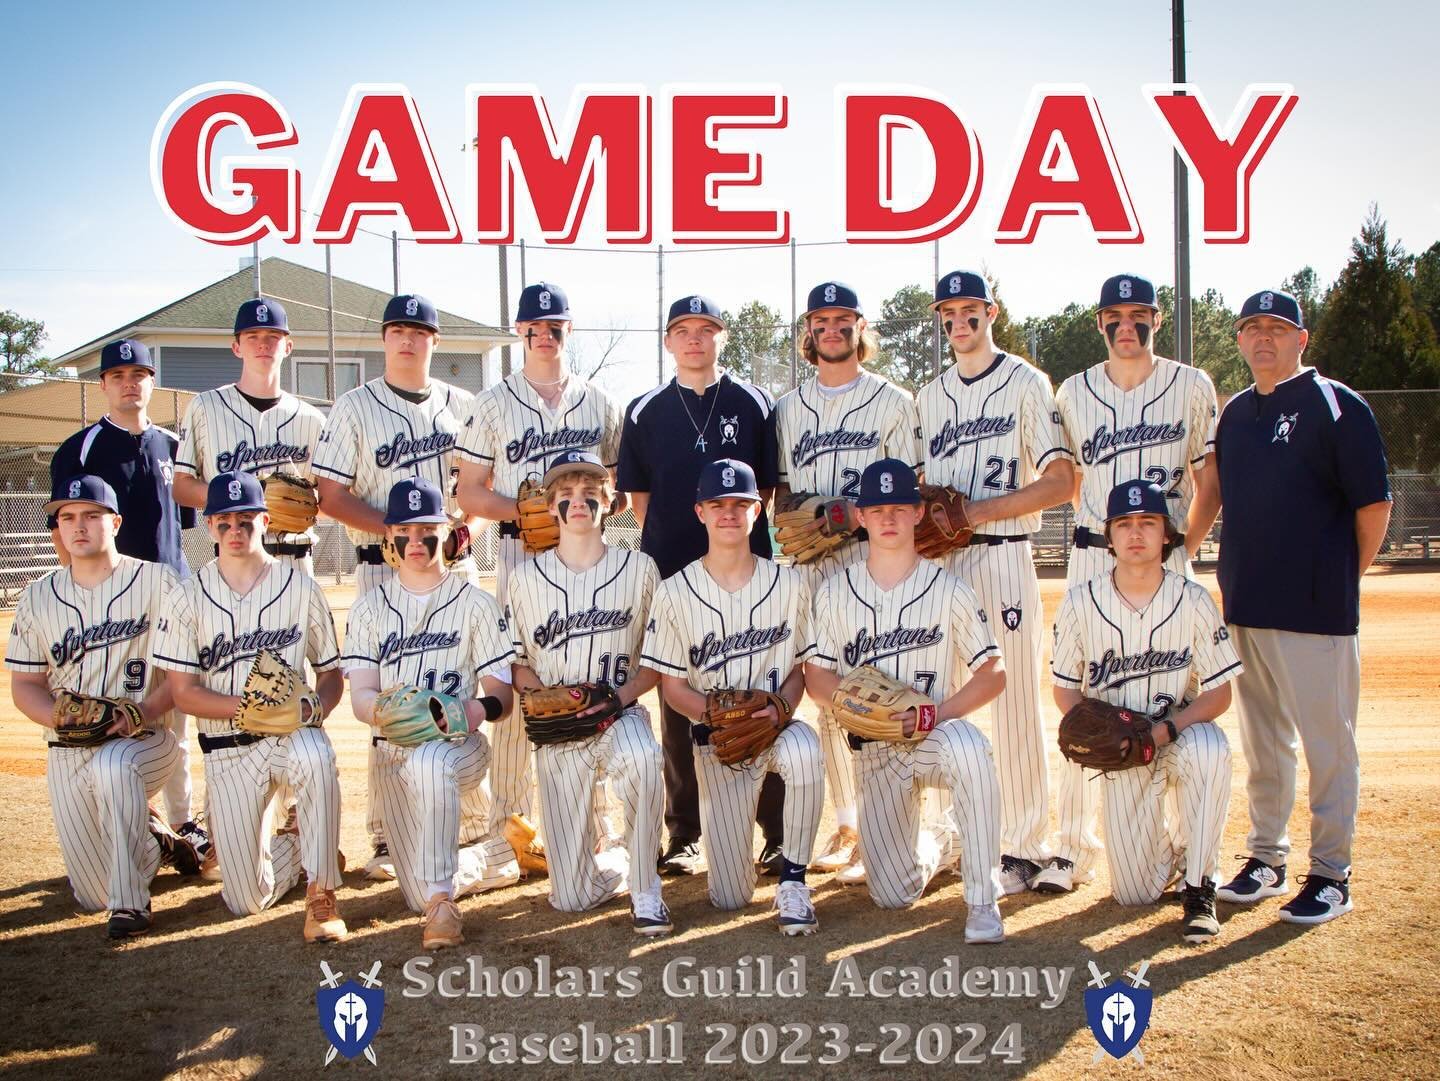 Quarterfinals Day 2! Come support your SGA Spartans as they battle the Creekside Cougars for a spot in the semis! Game starts at 10am at West Walton in Loganville! Buy your tickets at the gate or here:
https://gofan.co/event/1508277?schoolId=GA87832 